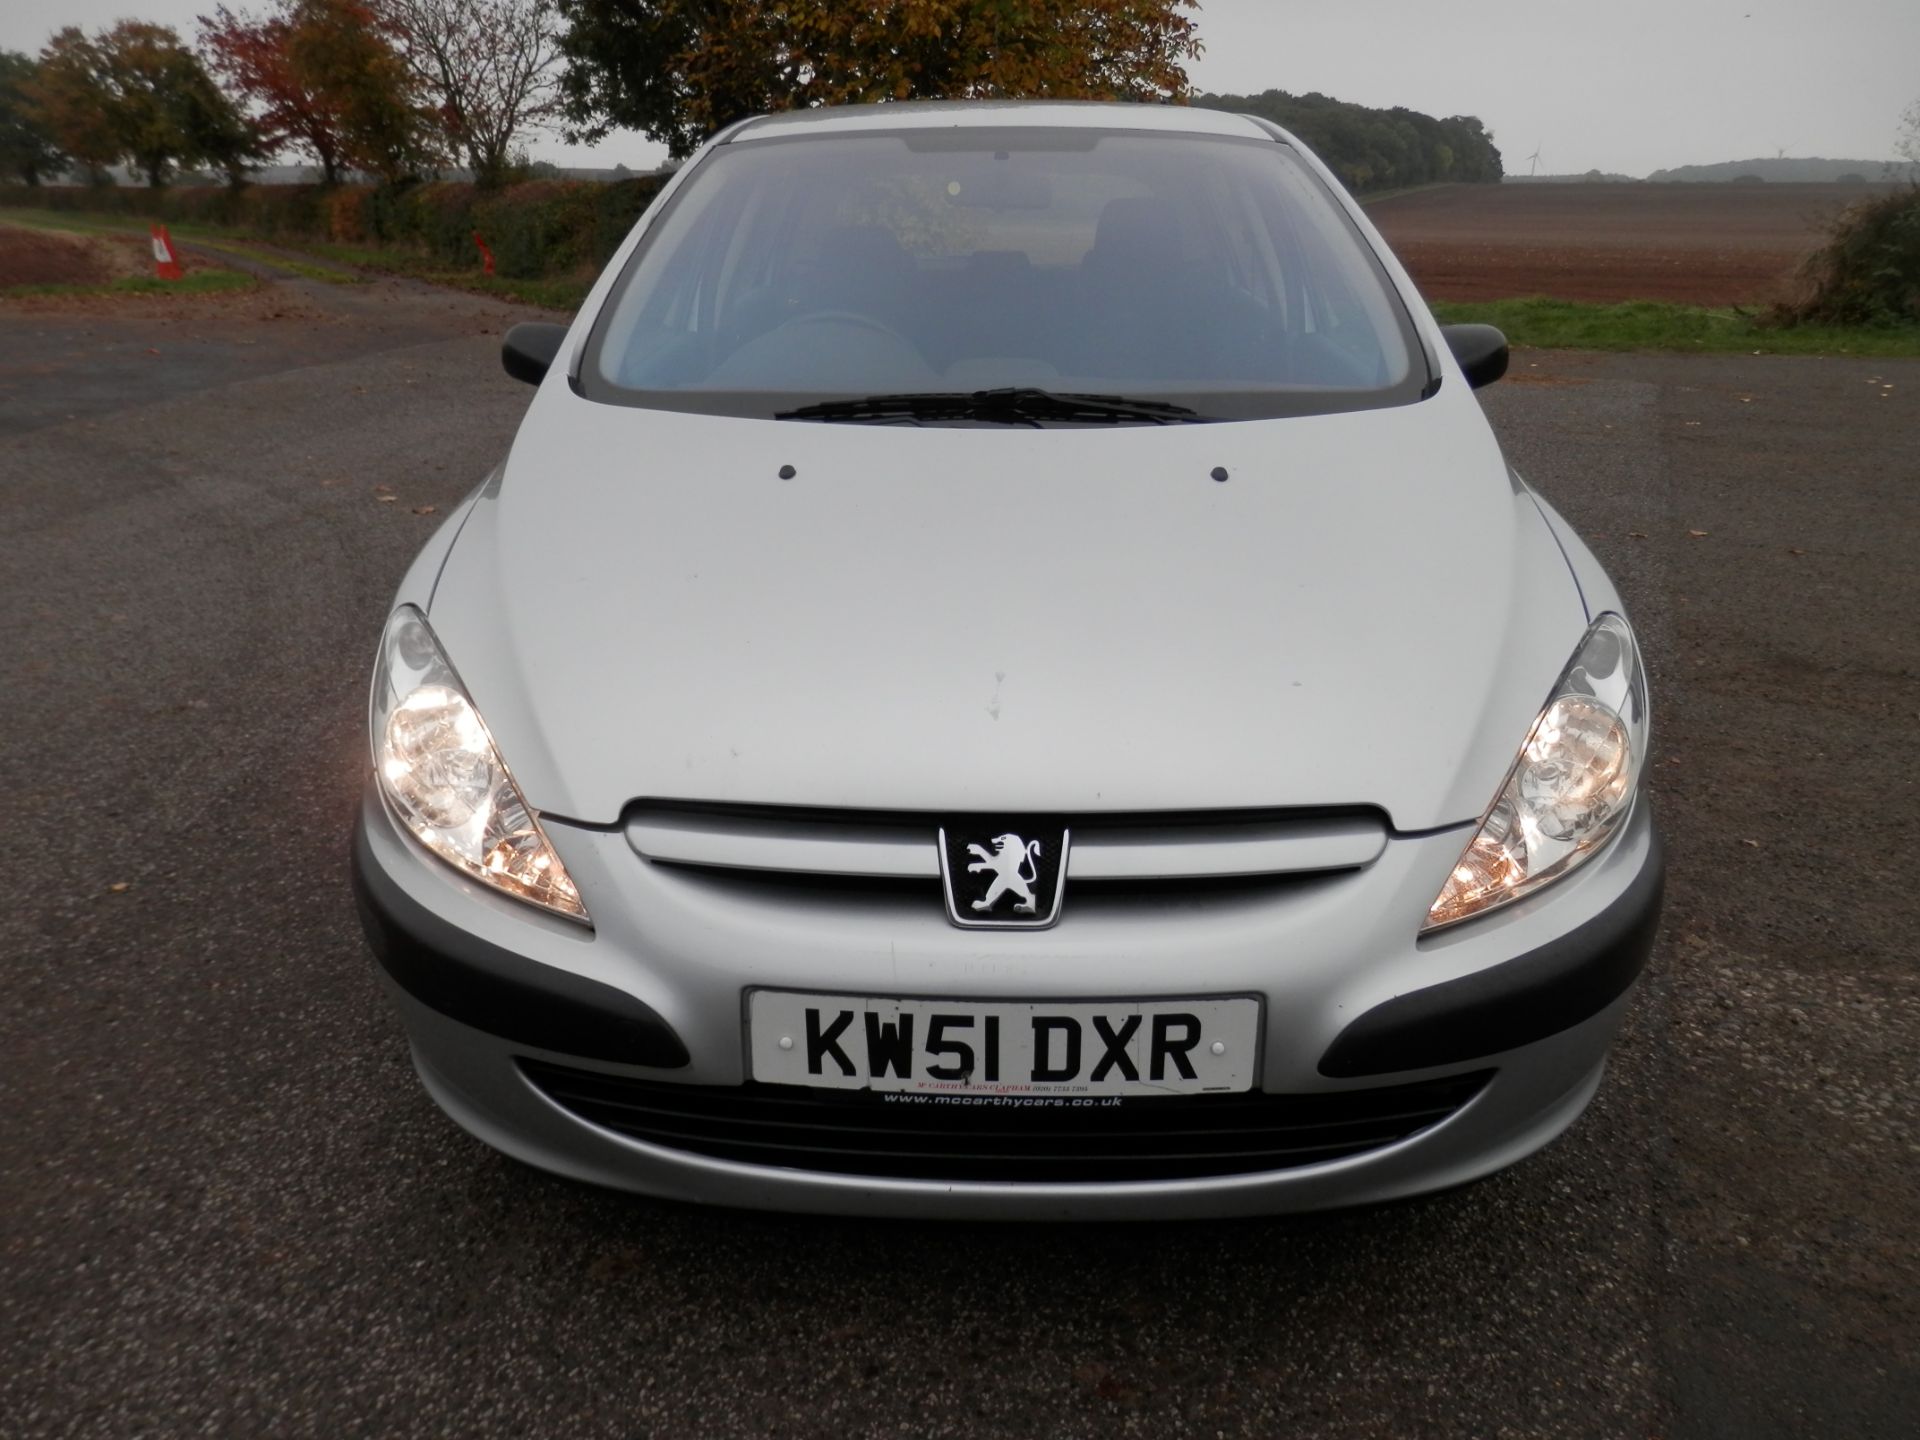 2002/51 PLATE PEUGEOT 307 1.6 LX AUTOMATIC, ONLY 51K WARRANTED MILES & MOT MAY 2017, GREAT CAR. - Image 4 of 22